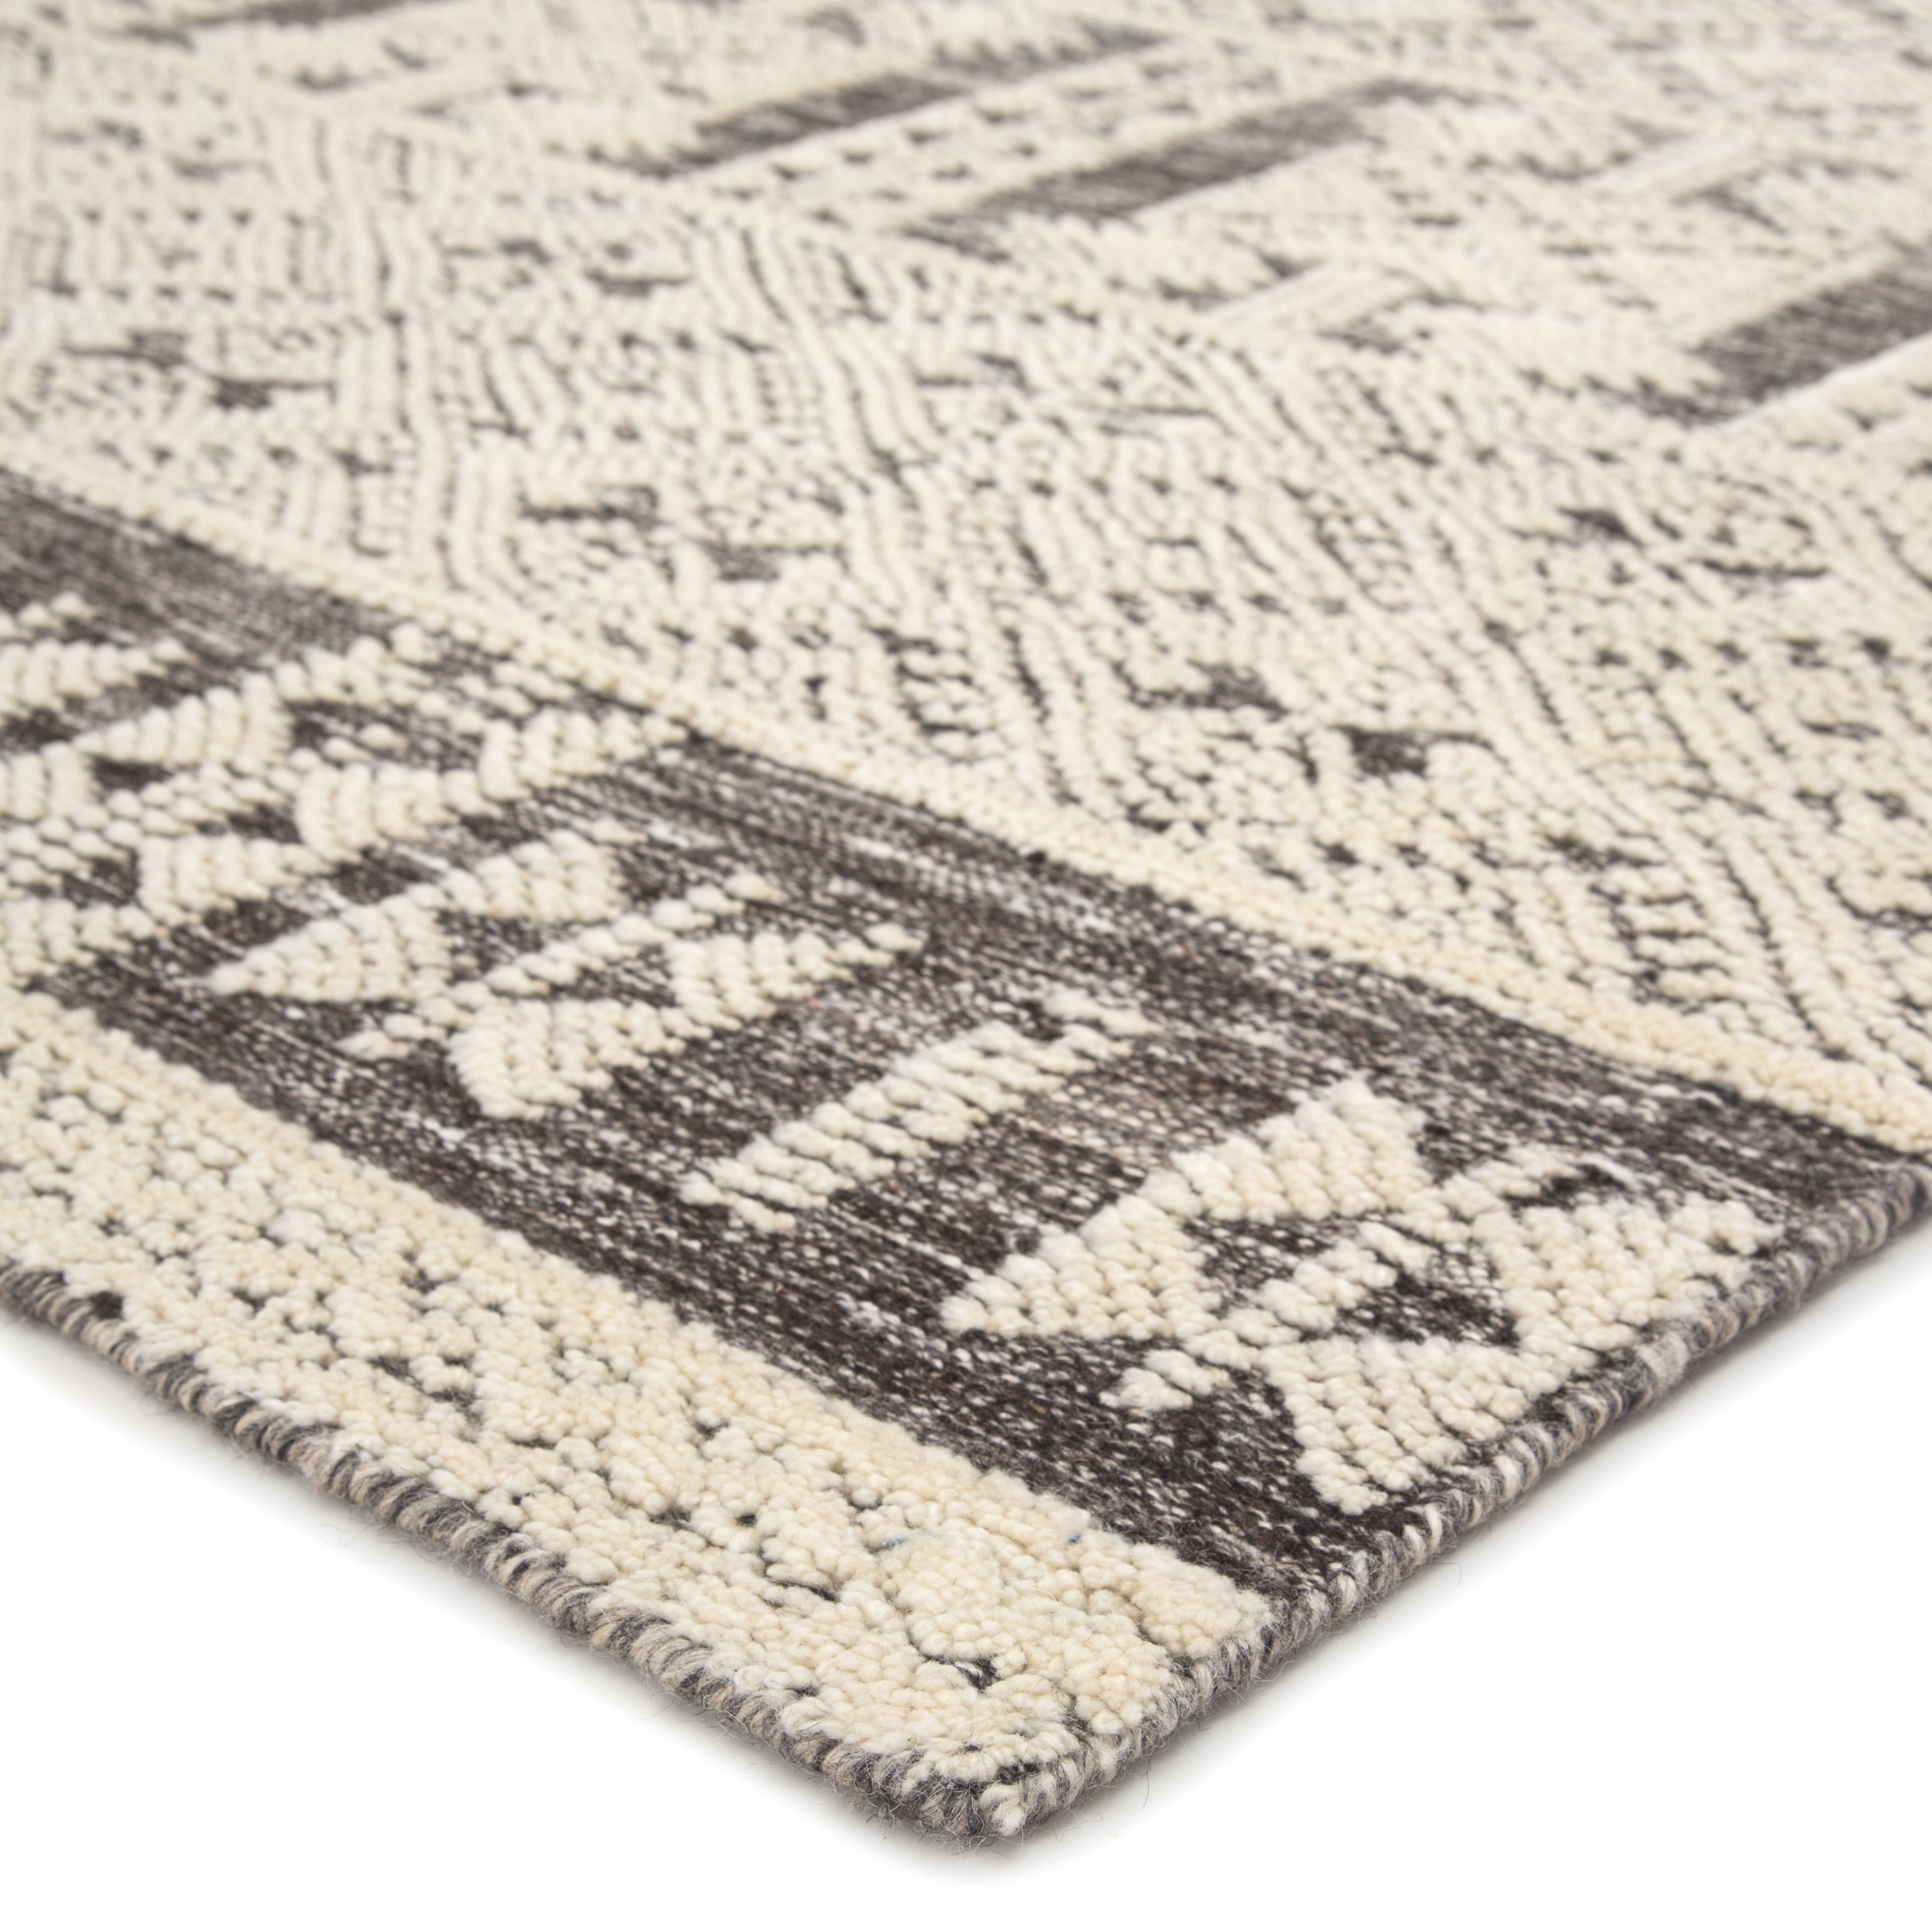 Origins Hand-Knotted Tribal Ivory/ Gray Area Rug (7'10"X10'10") - Image 1